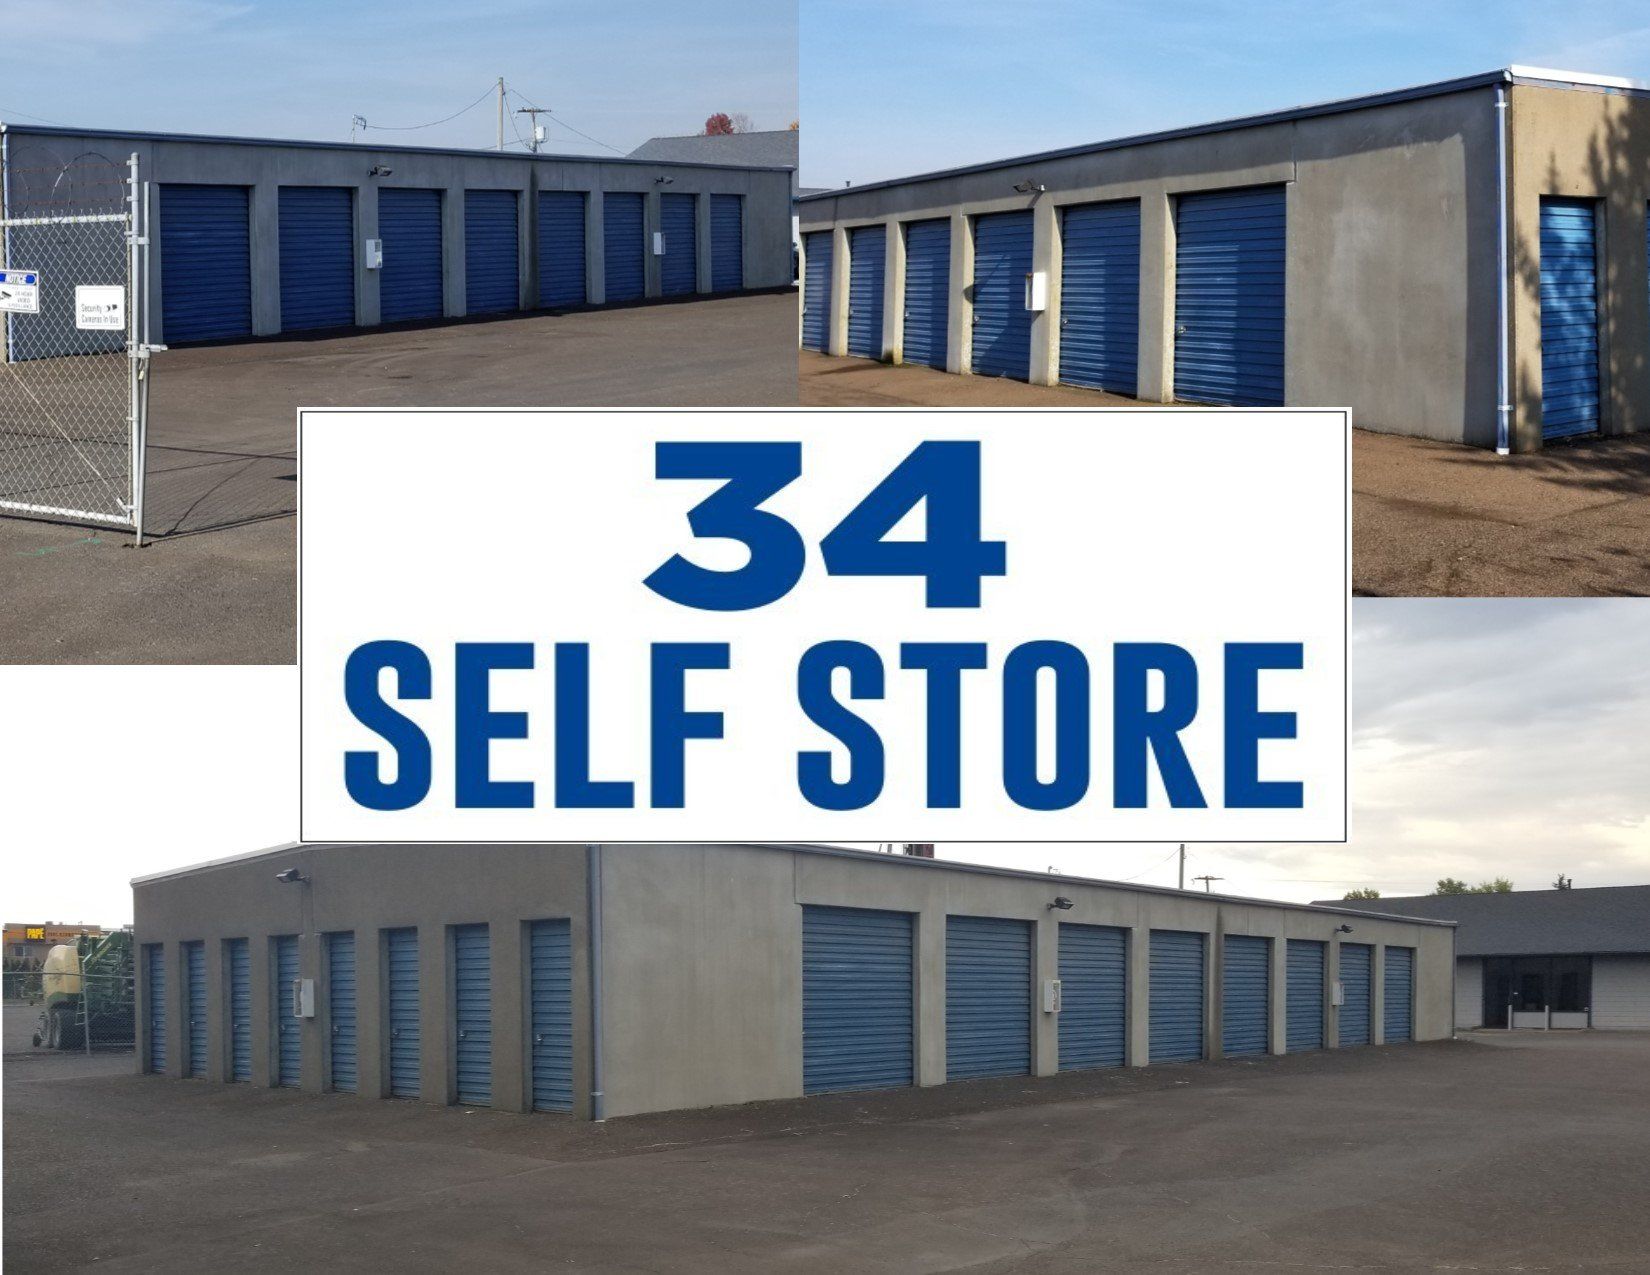 34 Safe Store drive up building, isolated, with parking